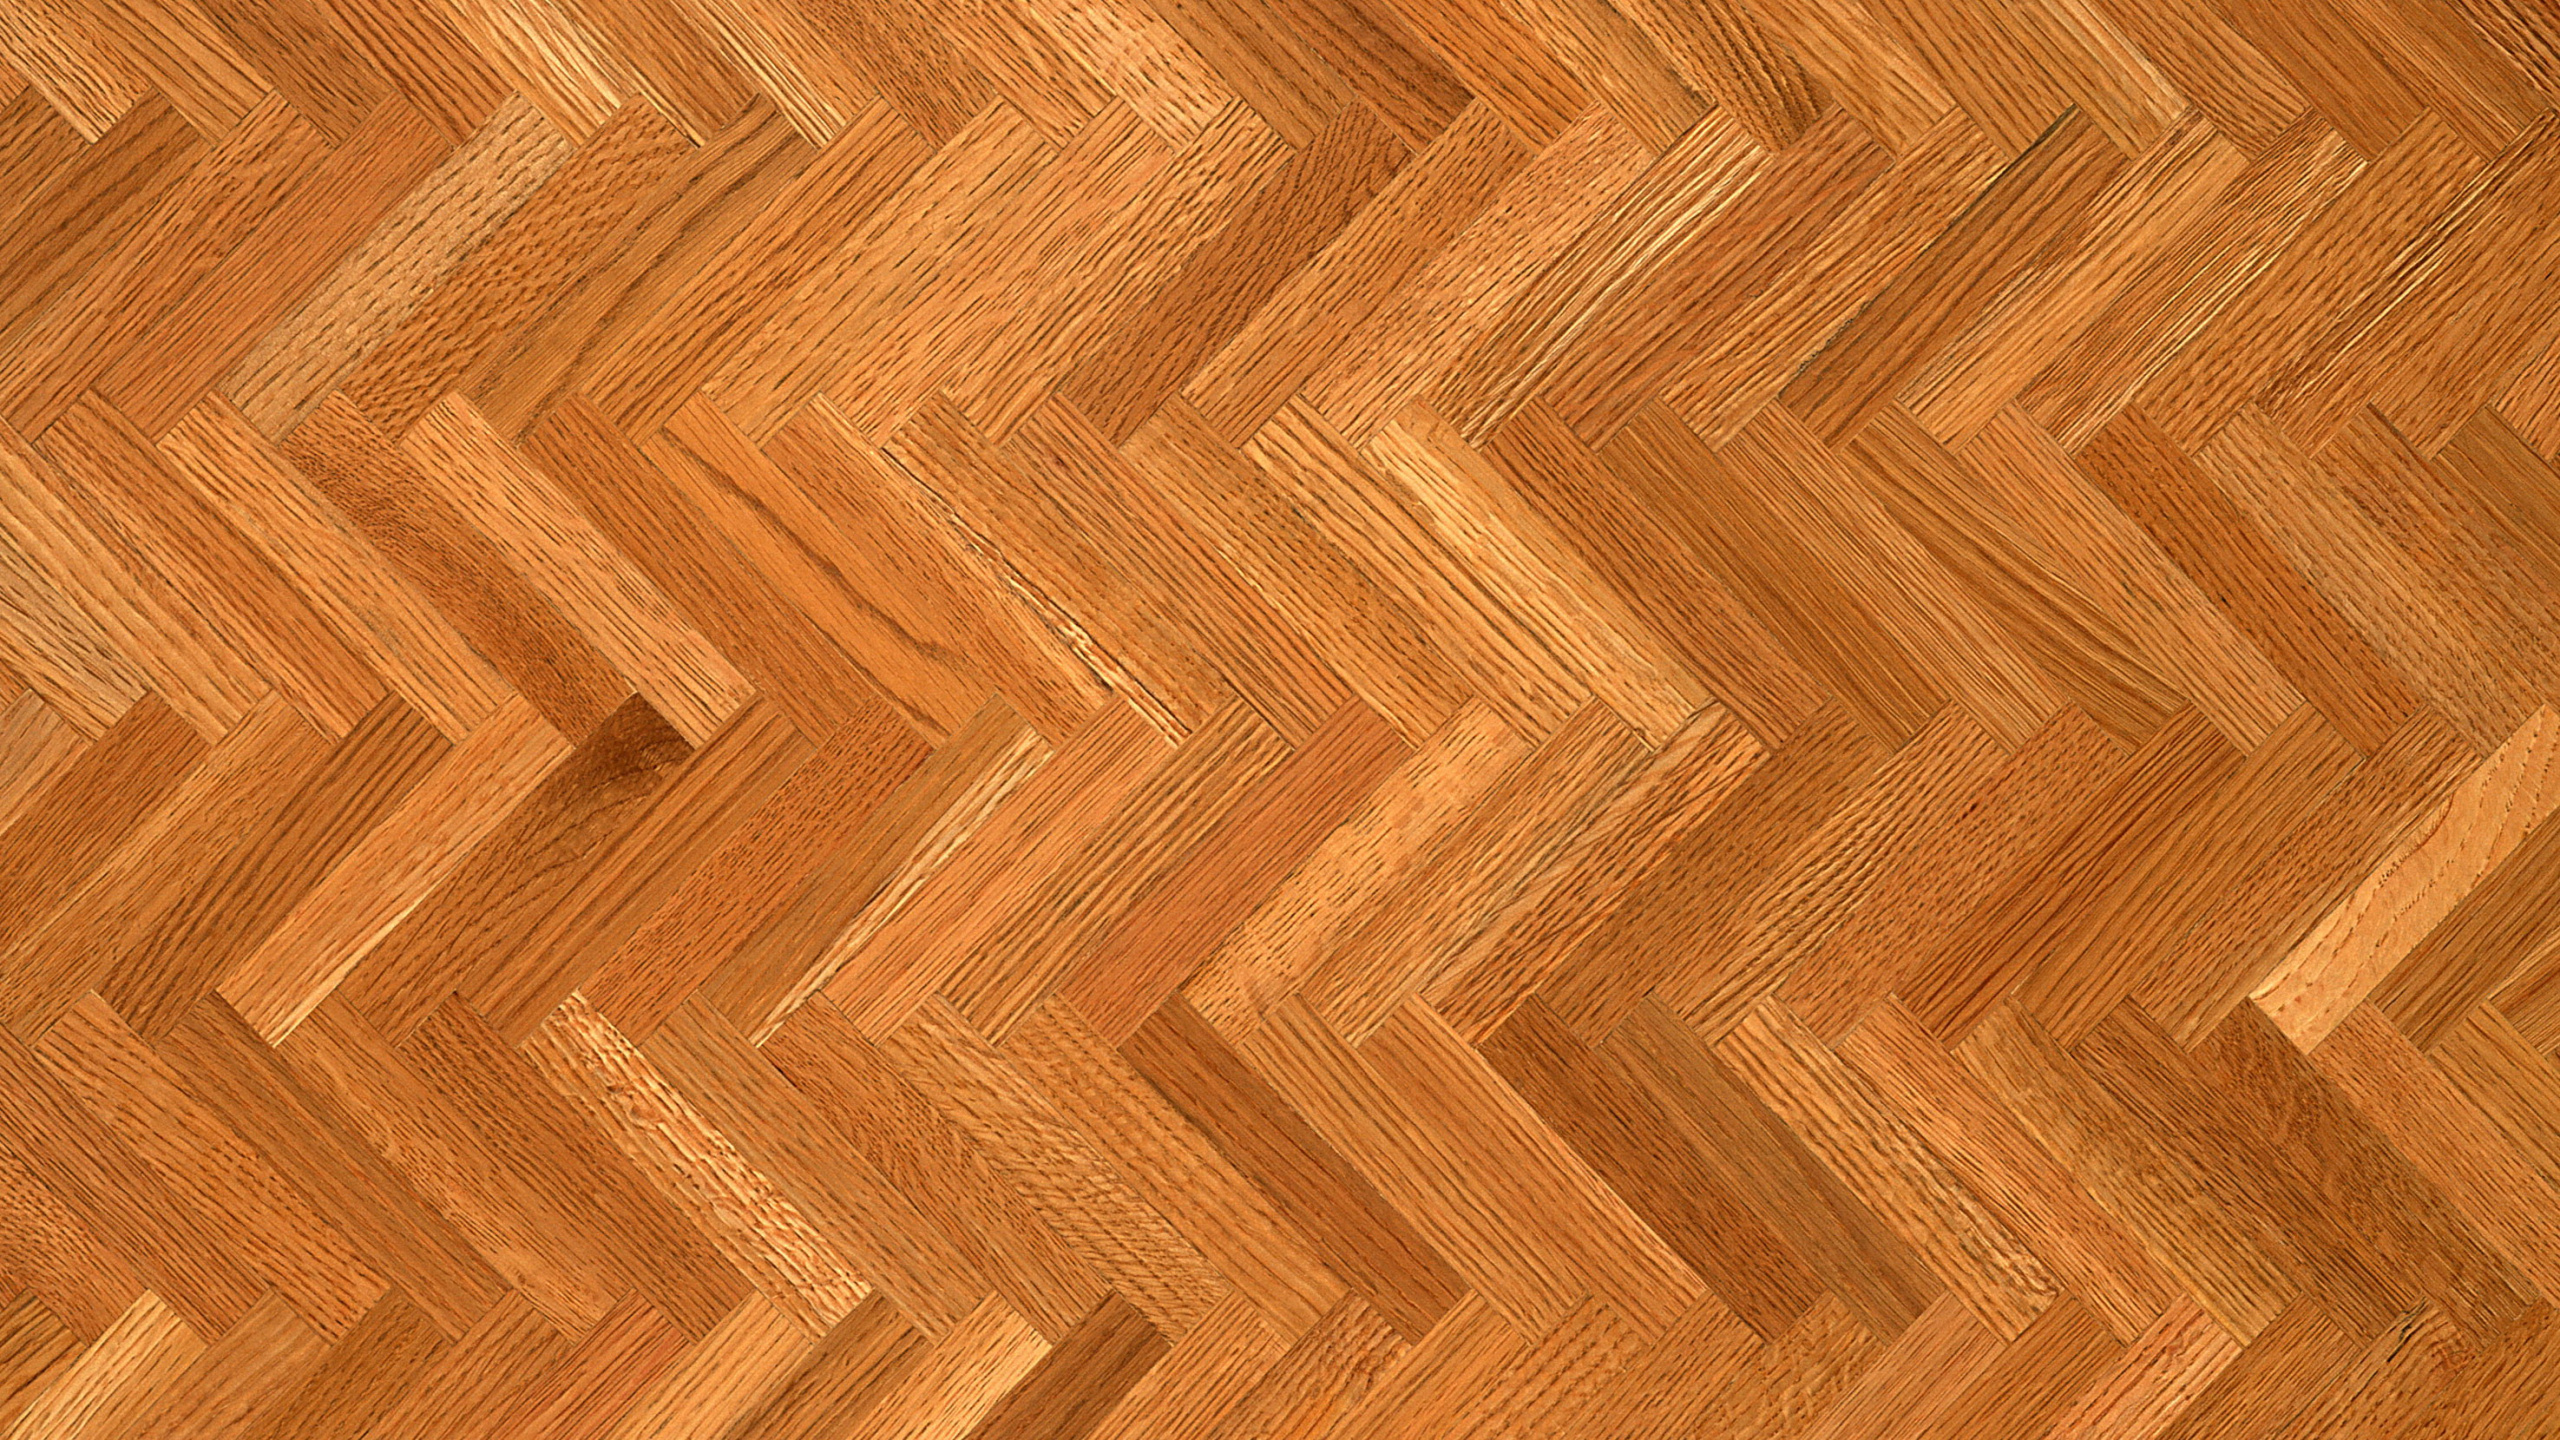 Brown and White Checkered Textile. Wallpaper in 2560x1440 Resolution